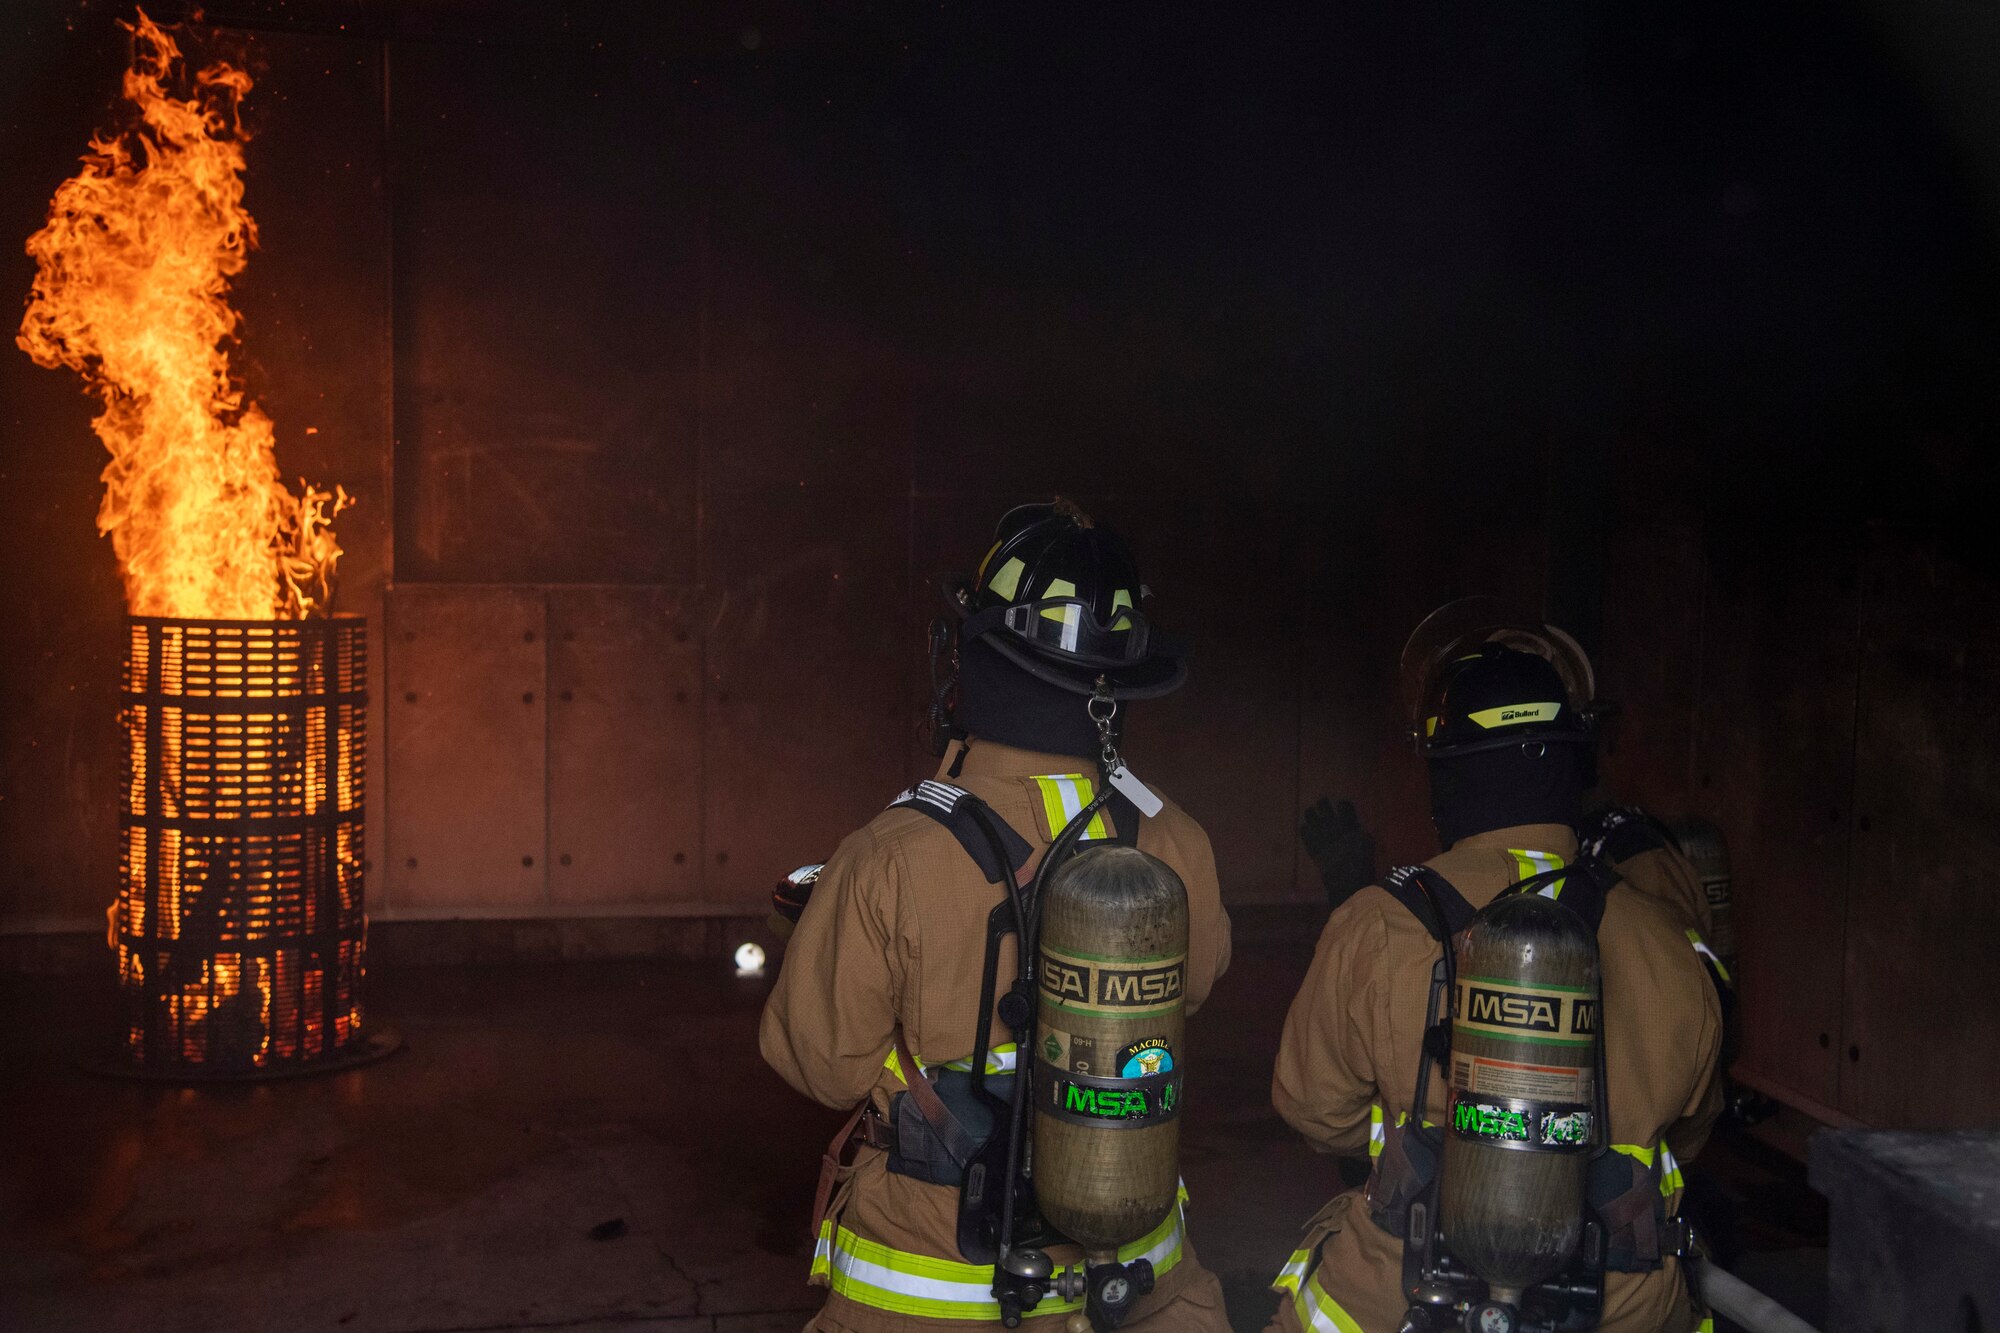 6th Civil Engineer Squadron (CES) Fire and Emergency Services Airmen examine a fire during a live-burn exercise at MacDill Air Force Base, Fla, March 23, 2021.